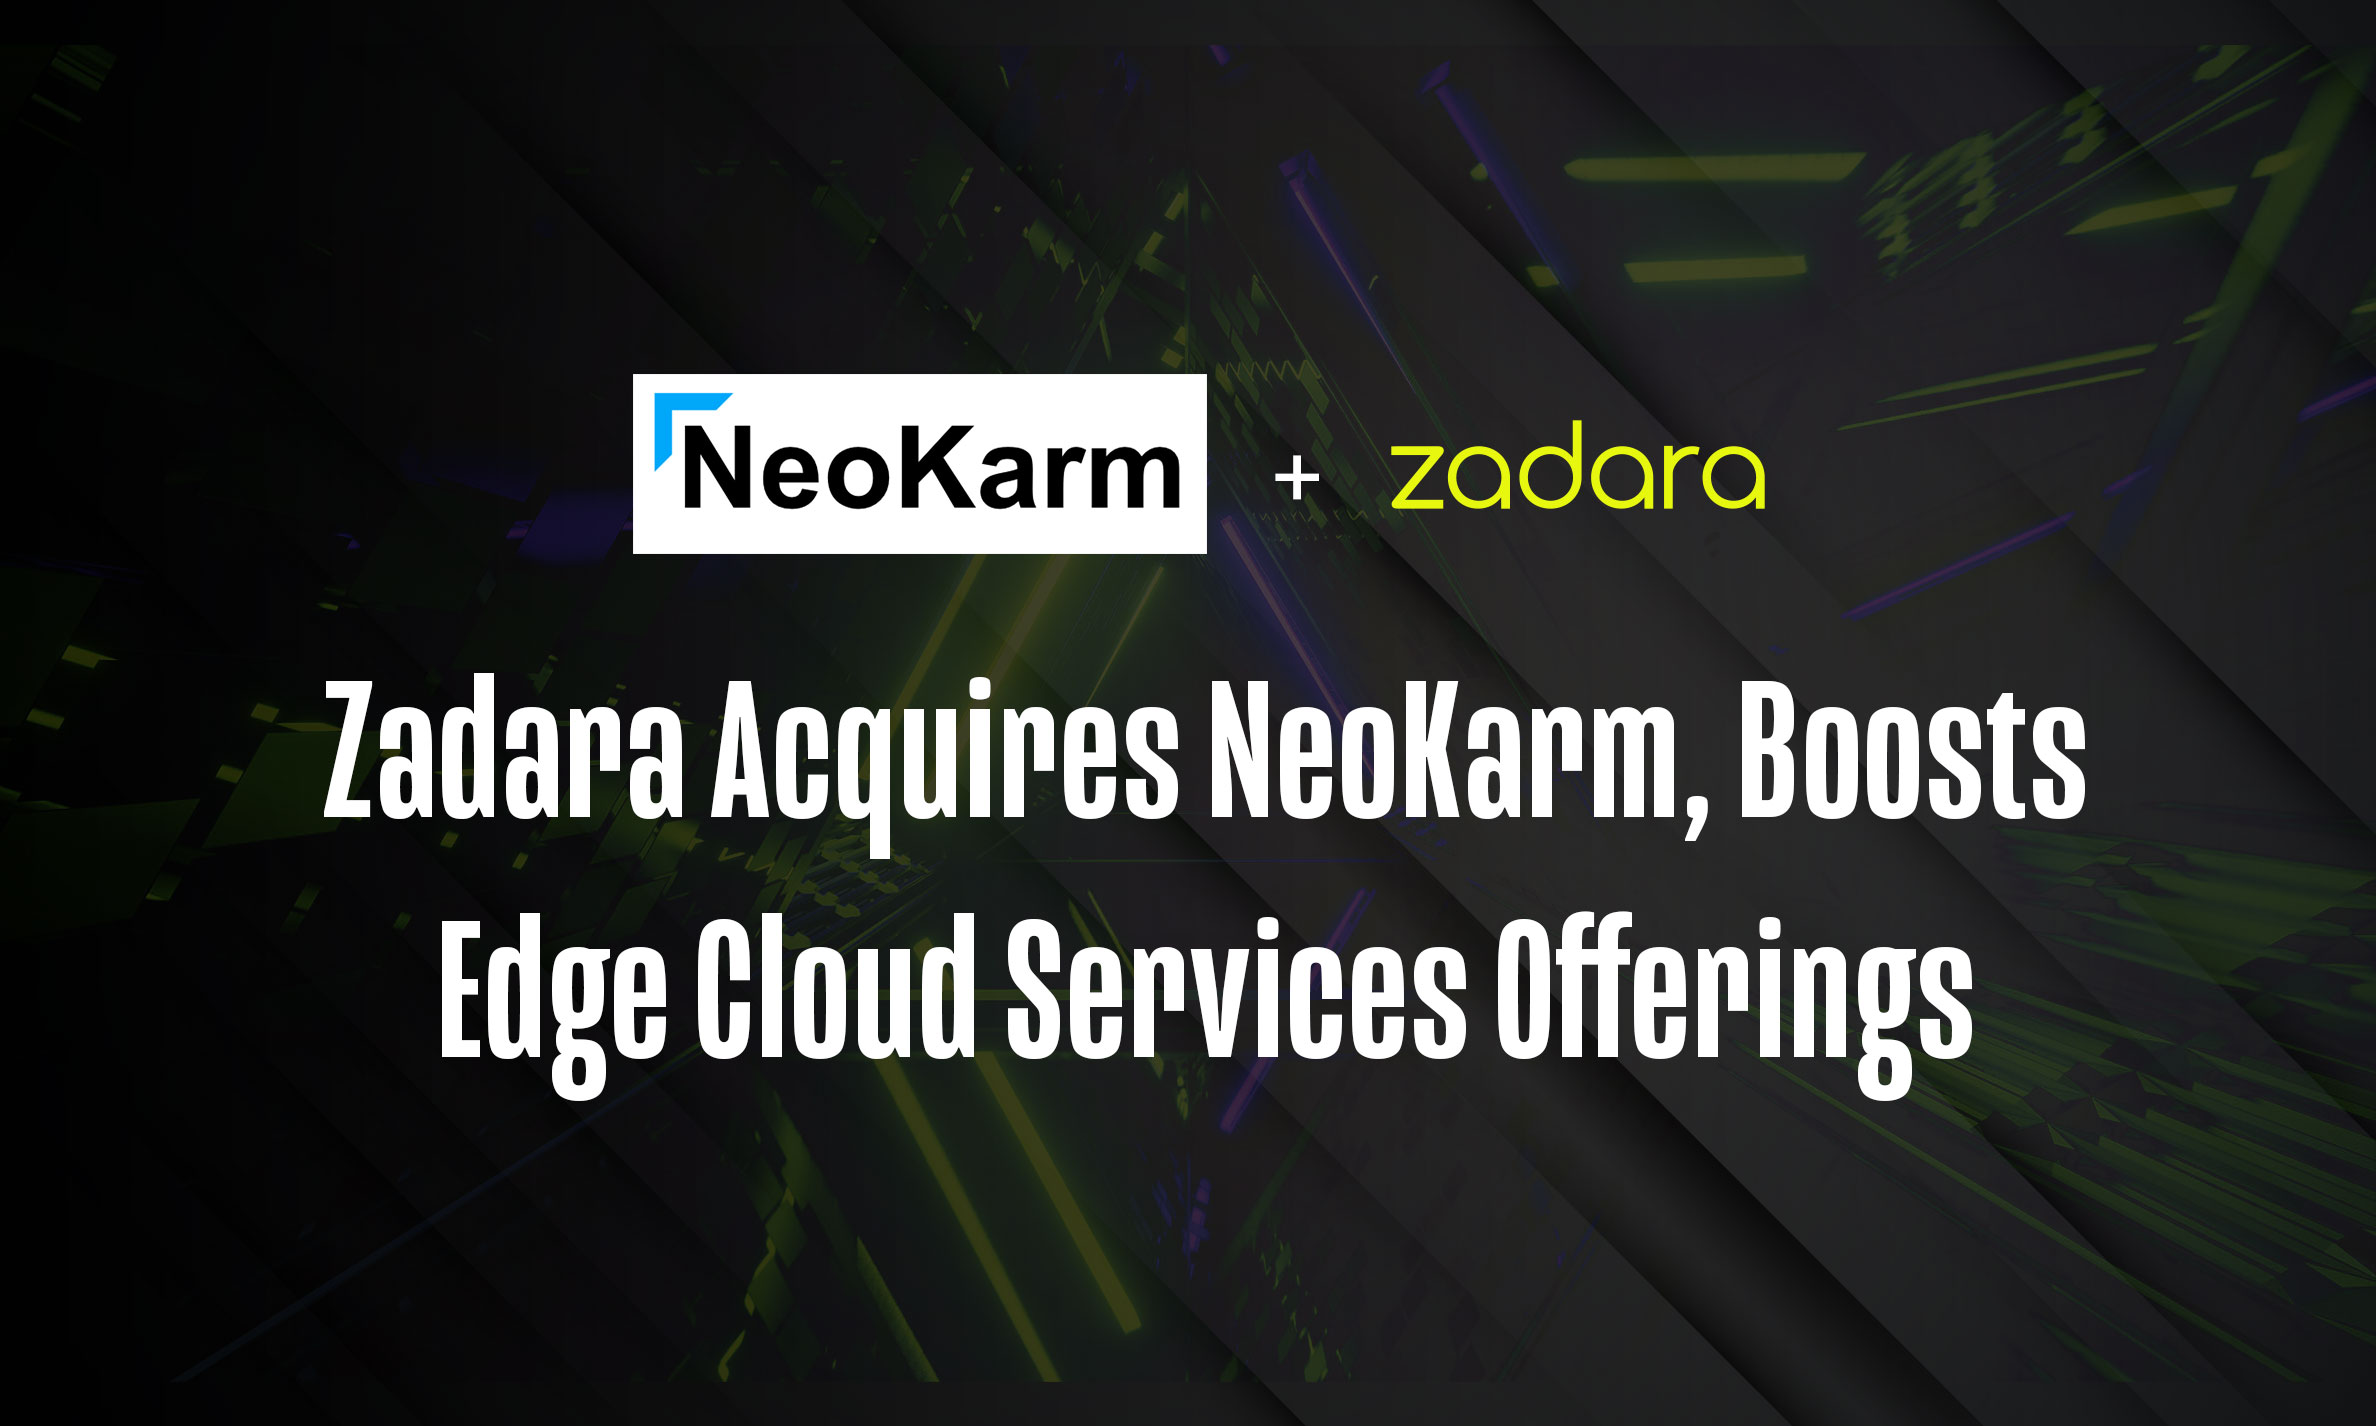 Zadara Acquires NeoKarm, Boosts Edge Cloud Services Offerings